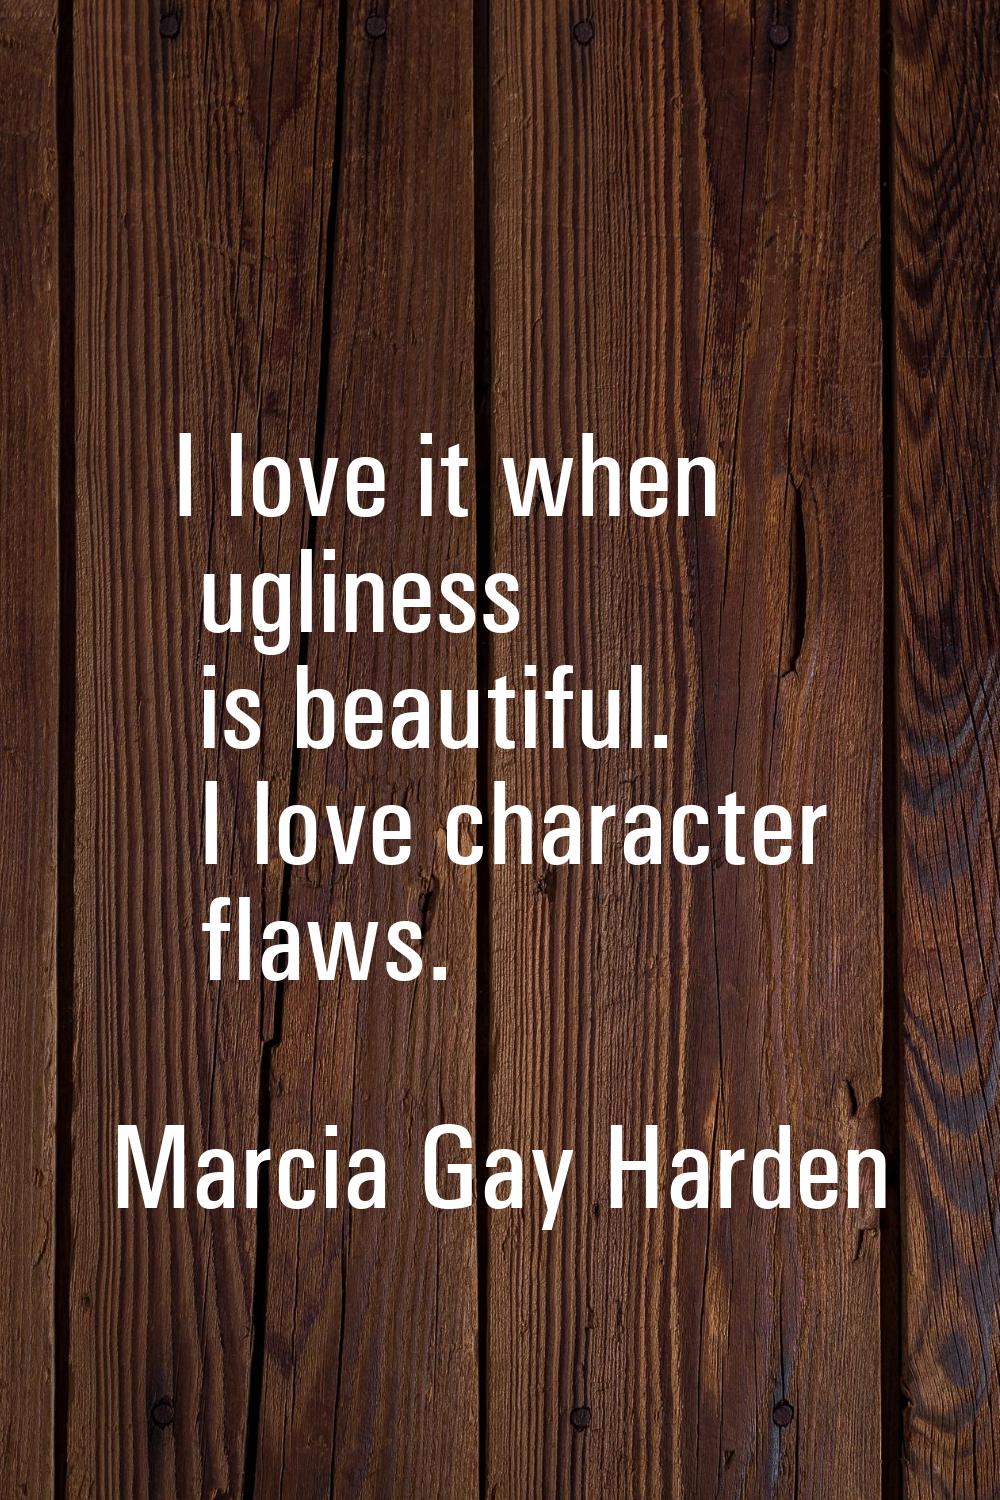 I love it when ugliness is beautiful. I love character flaws.